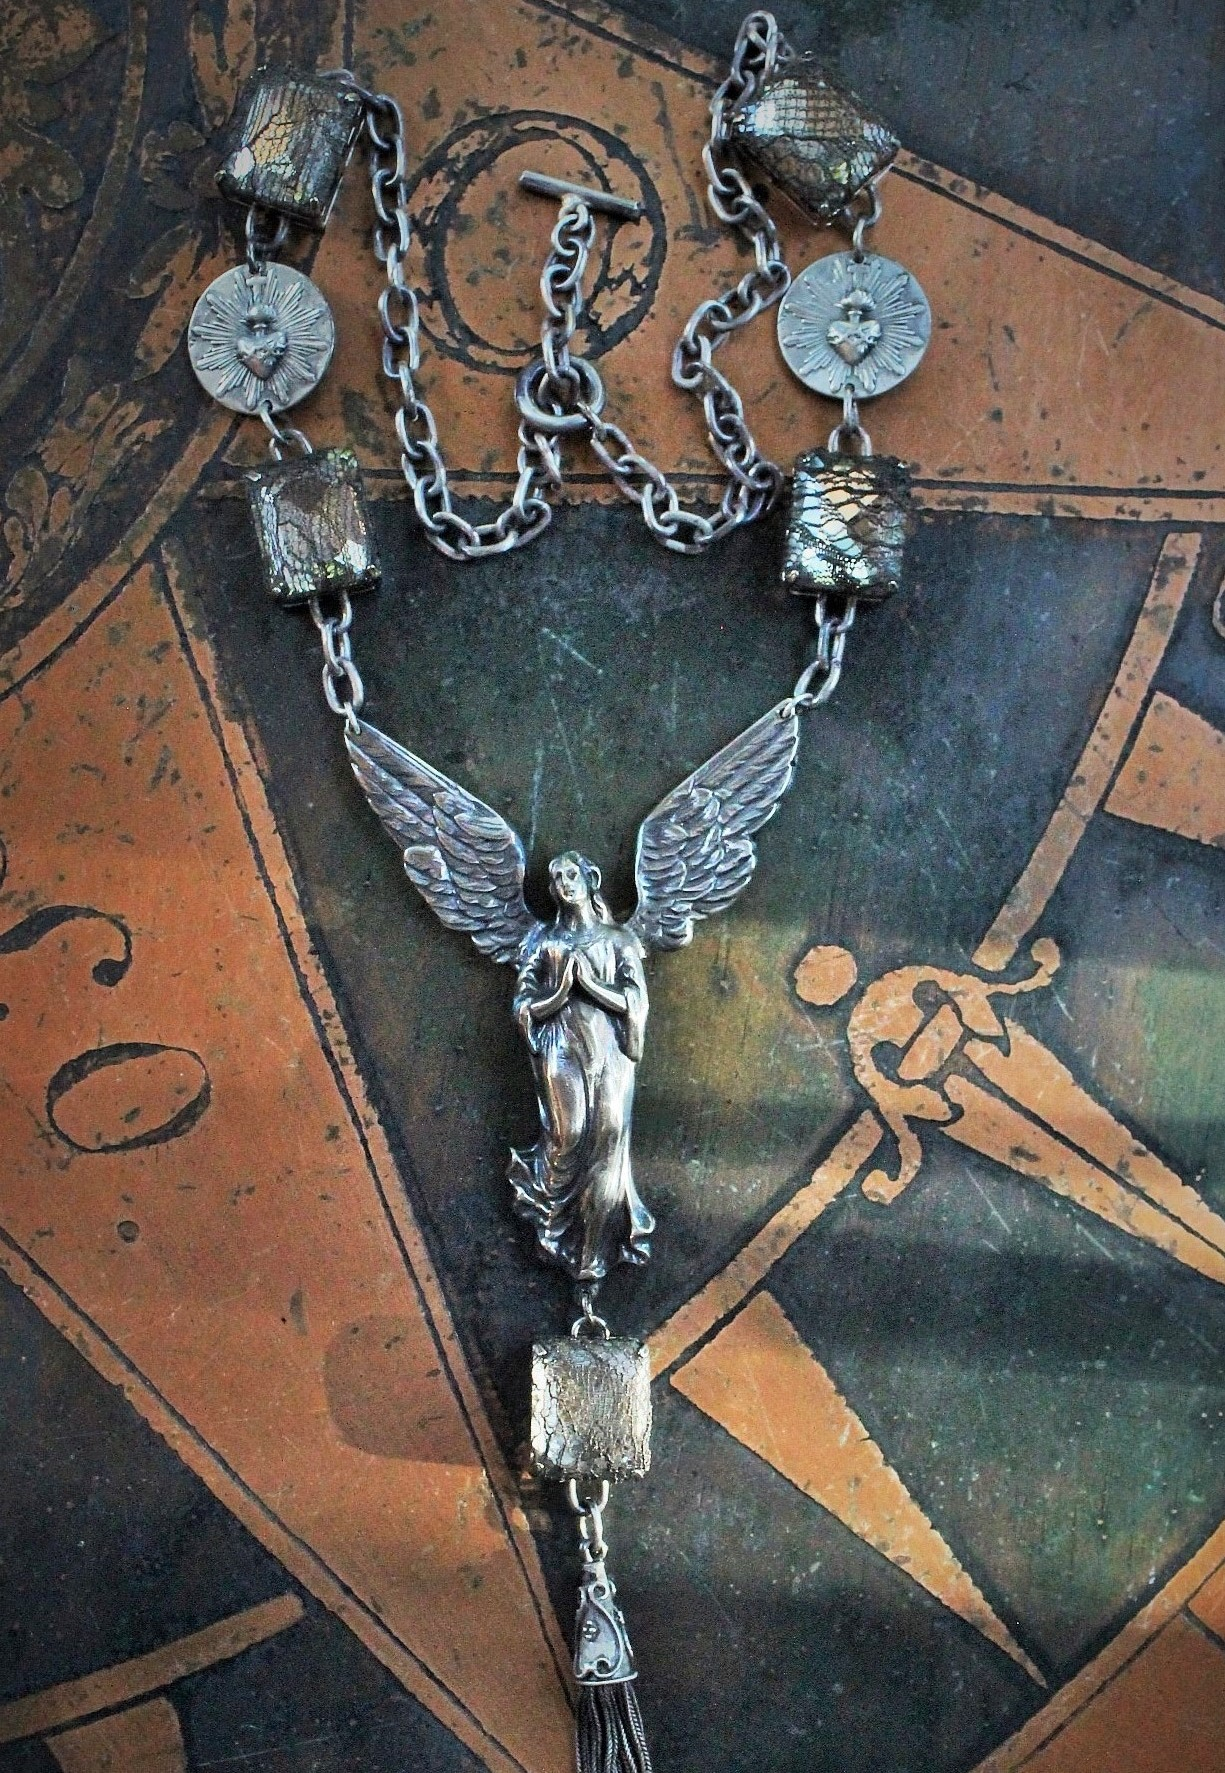 Pure Angel Necklace w/Cast Bronze Winged Angel,Vintage Lace Overlay Faceted Prong Set Glass,French Sacred Heart Medals, Antique Sterling Chain